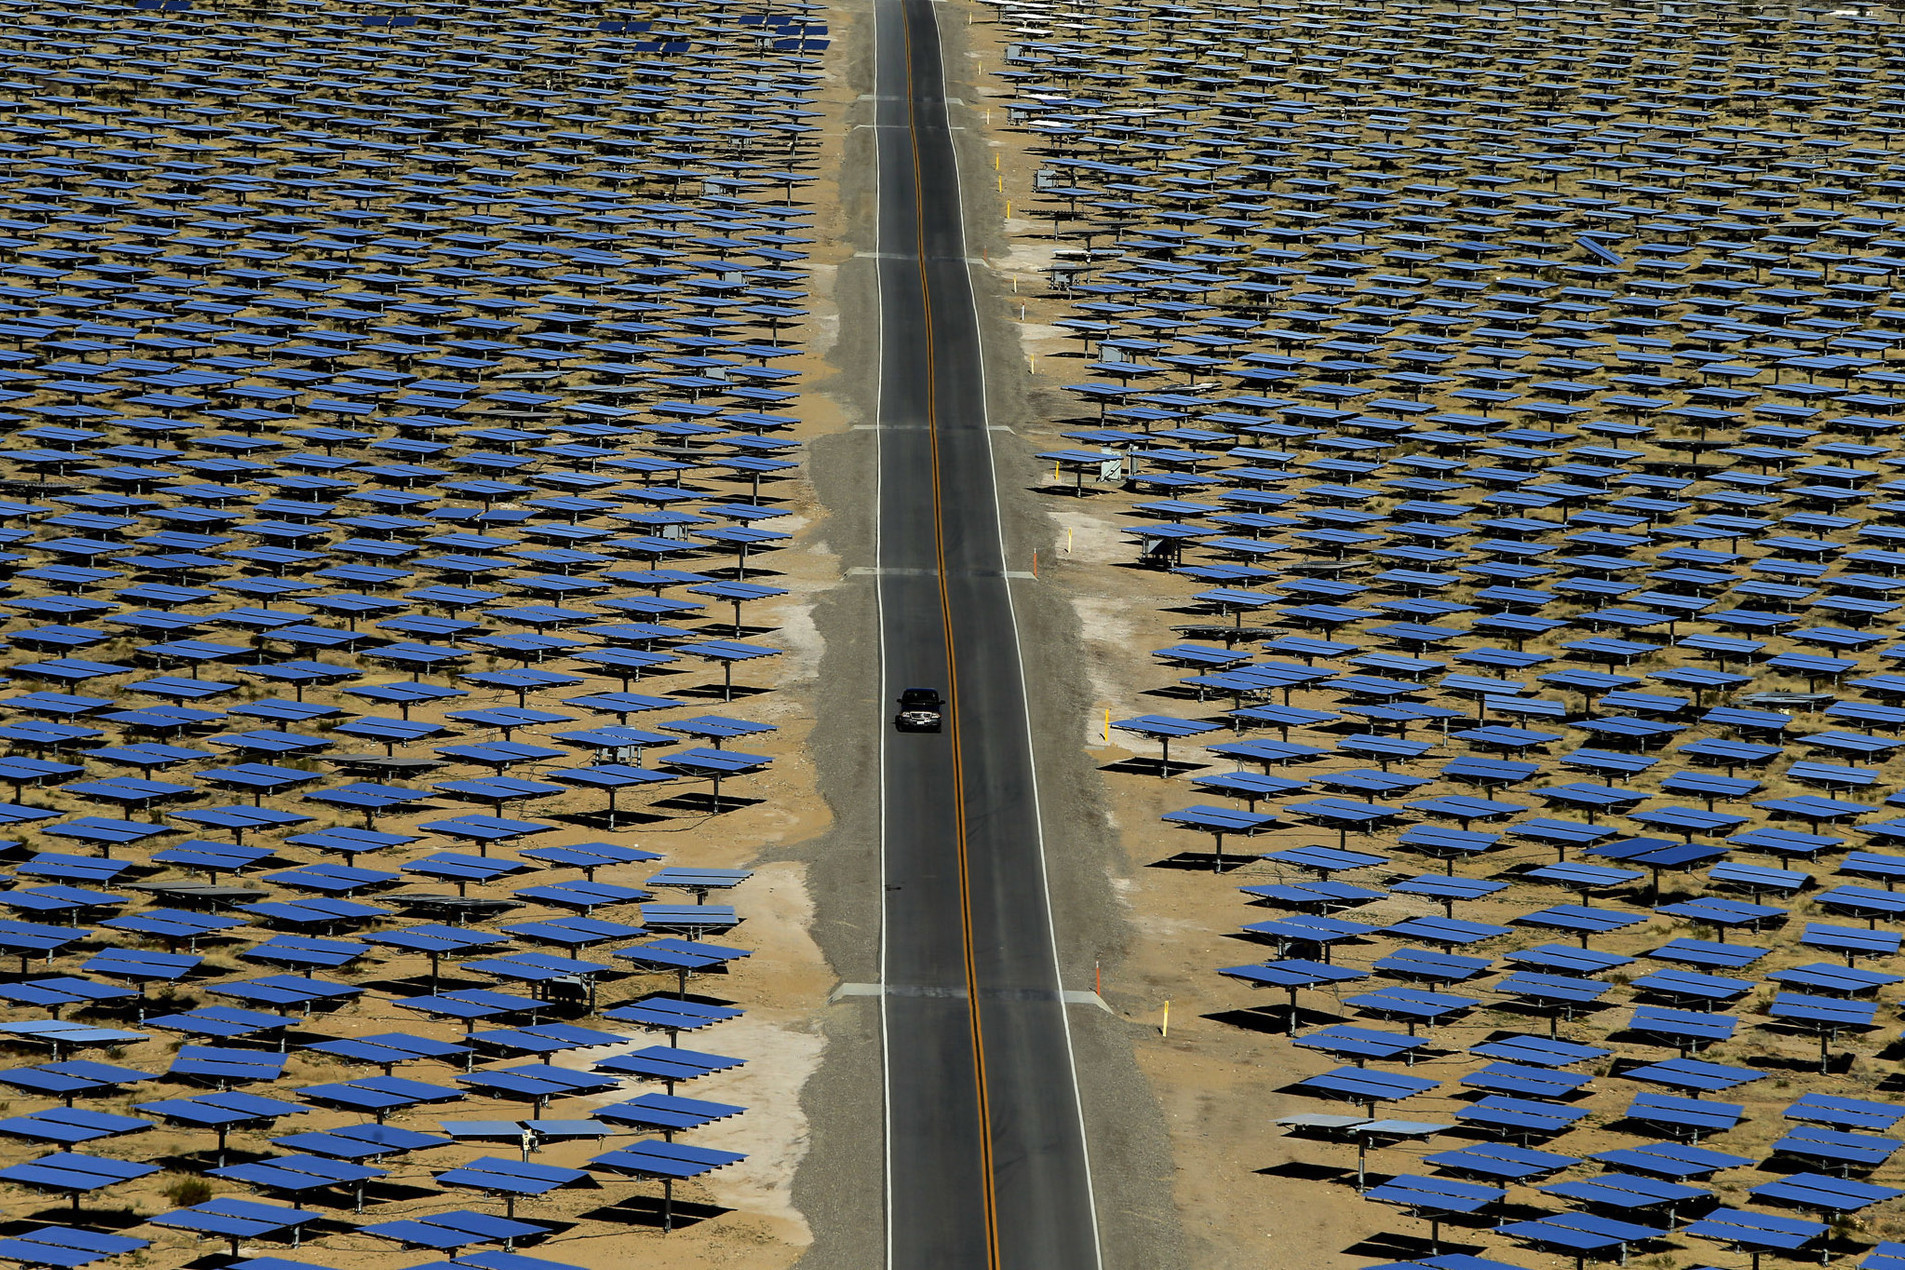 lesson-for-california-before-expanding-solar-energy-figure-out-a-way